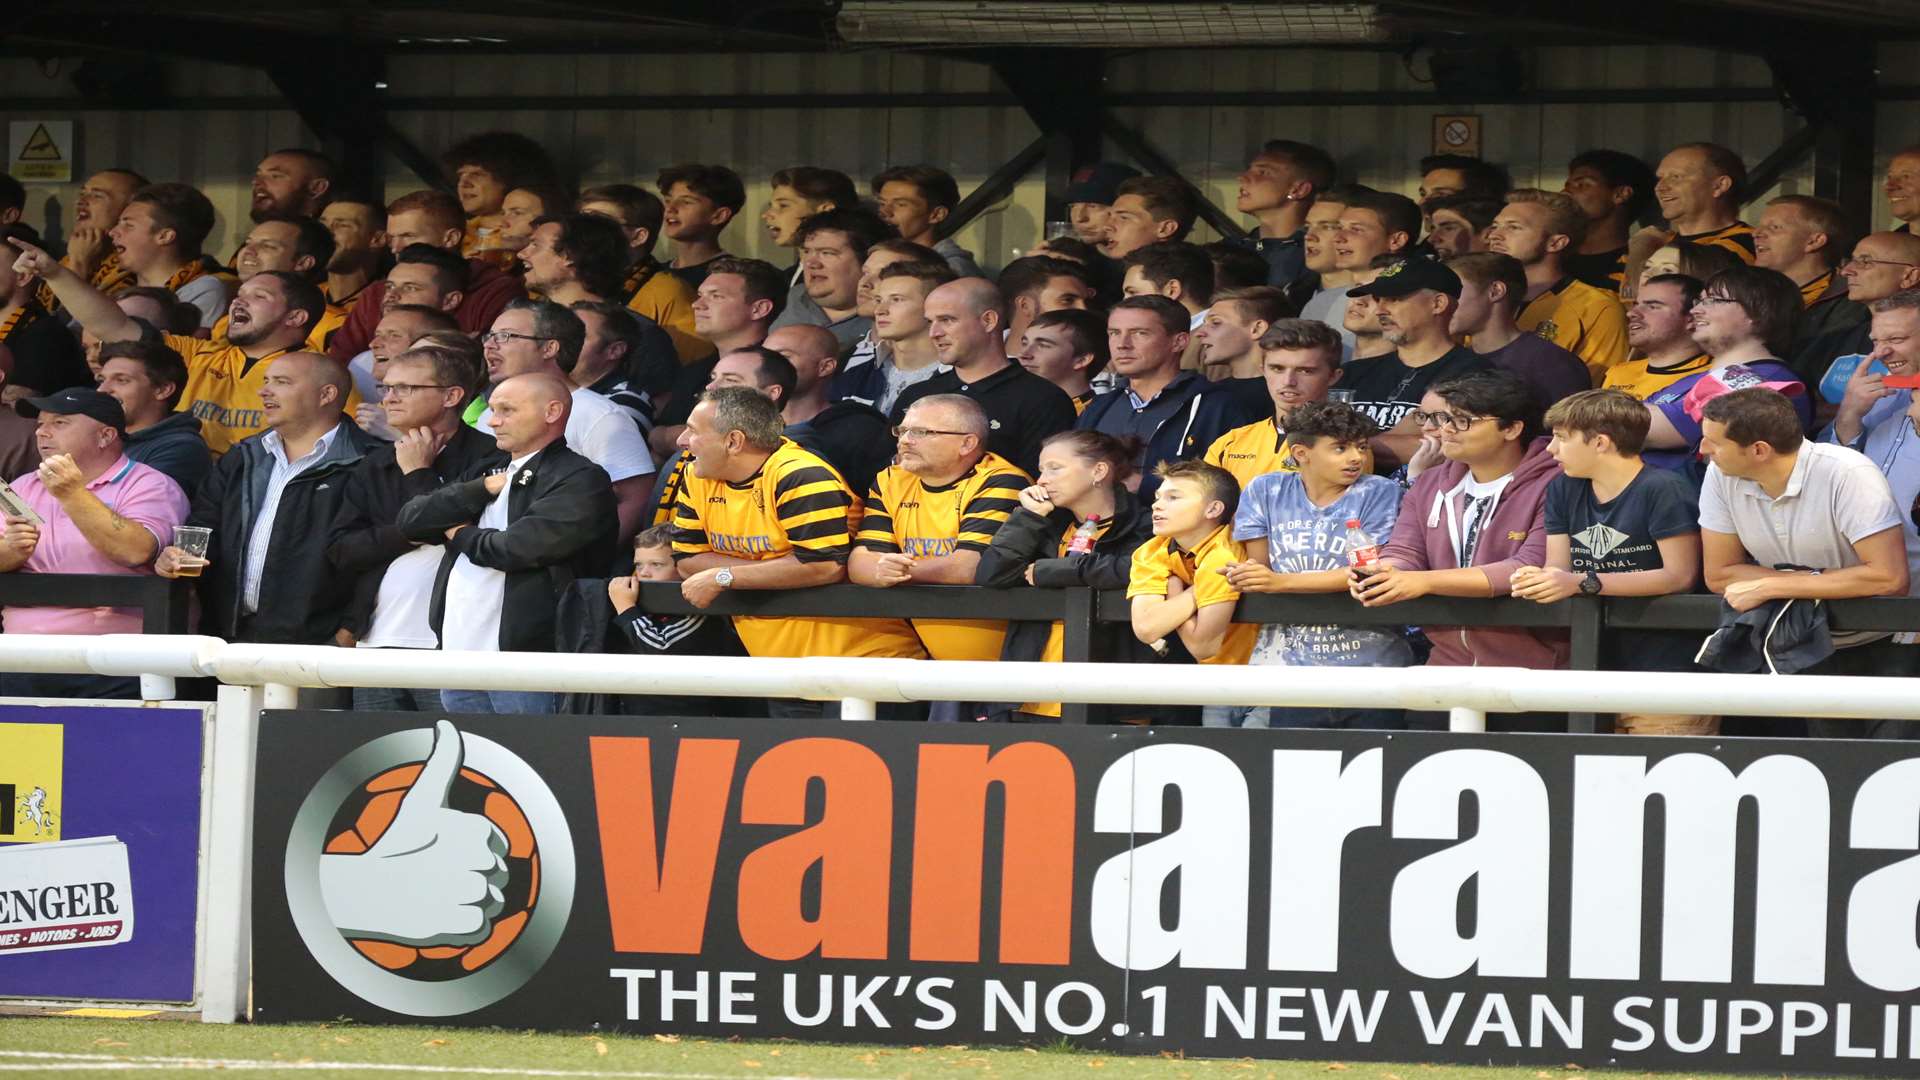 Maidstone were allocated 800 tickets for the game against Ebbsfleet at Stonebridge Road Picture: Martin Apps